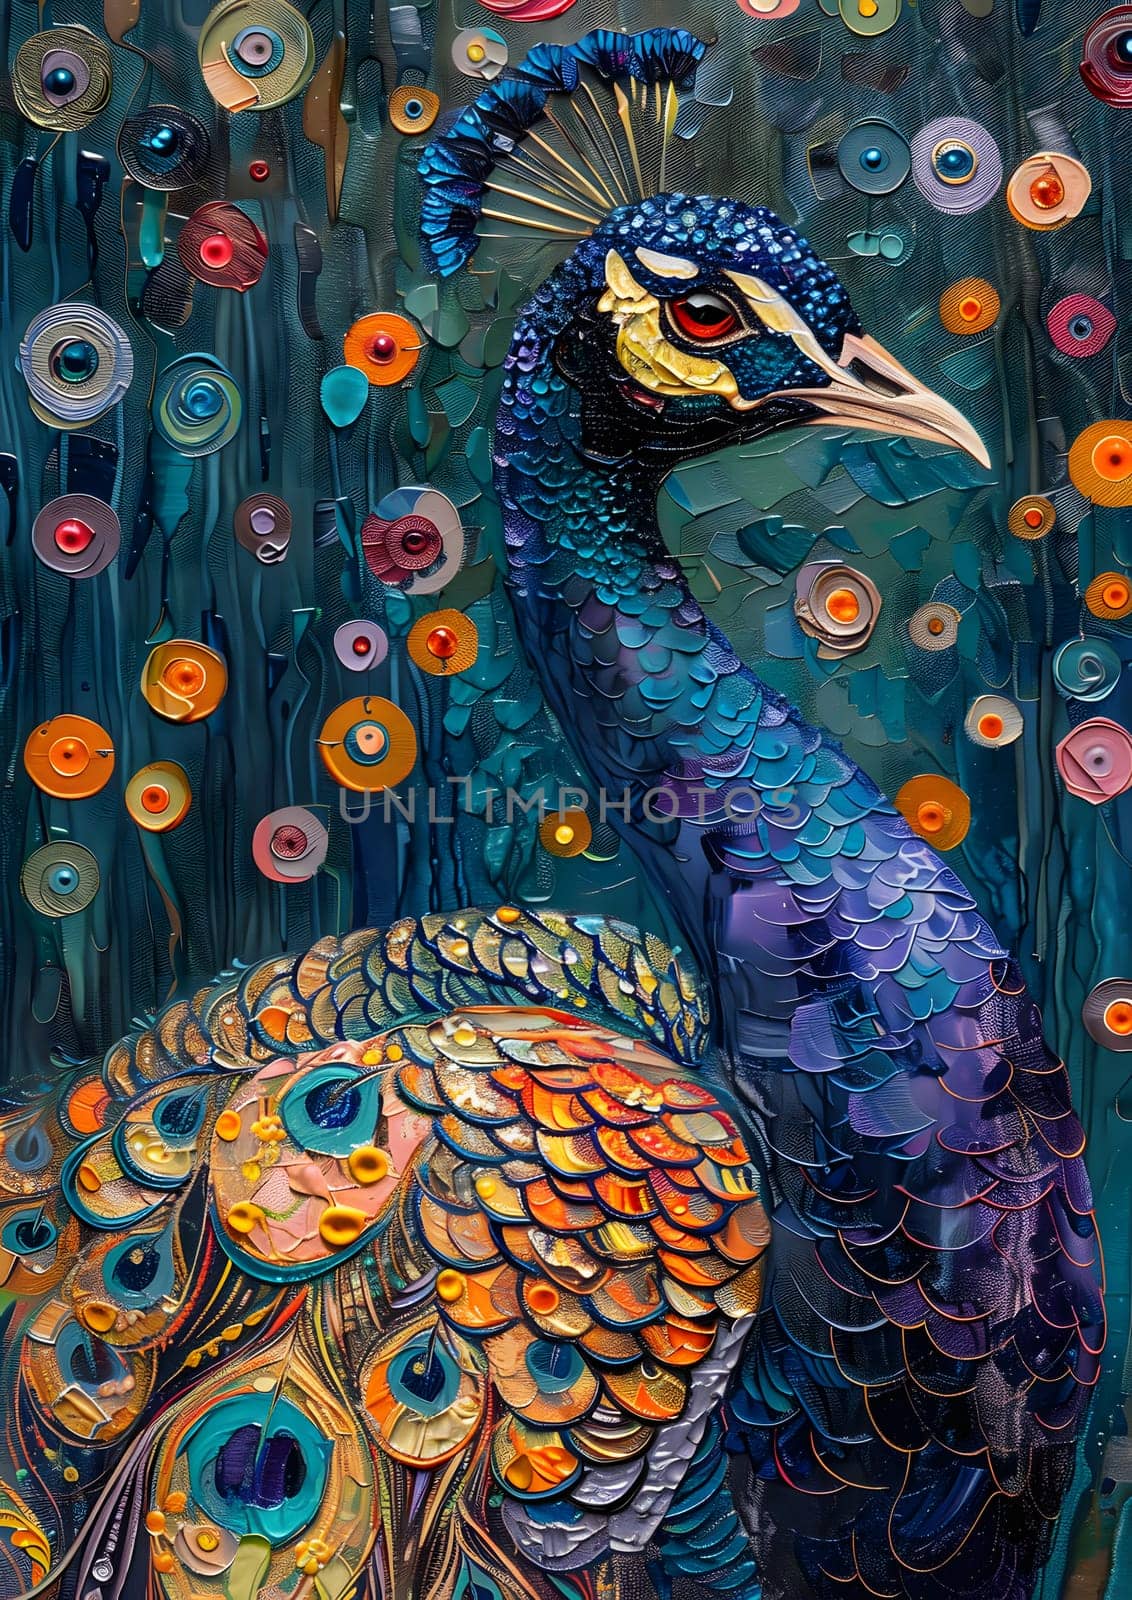 A vibrant painting featuring a majestic peacock surrounded by colorful flowers in the background. This stunning artwork showcases the beauty of this bird species in a creative and artistic way